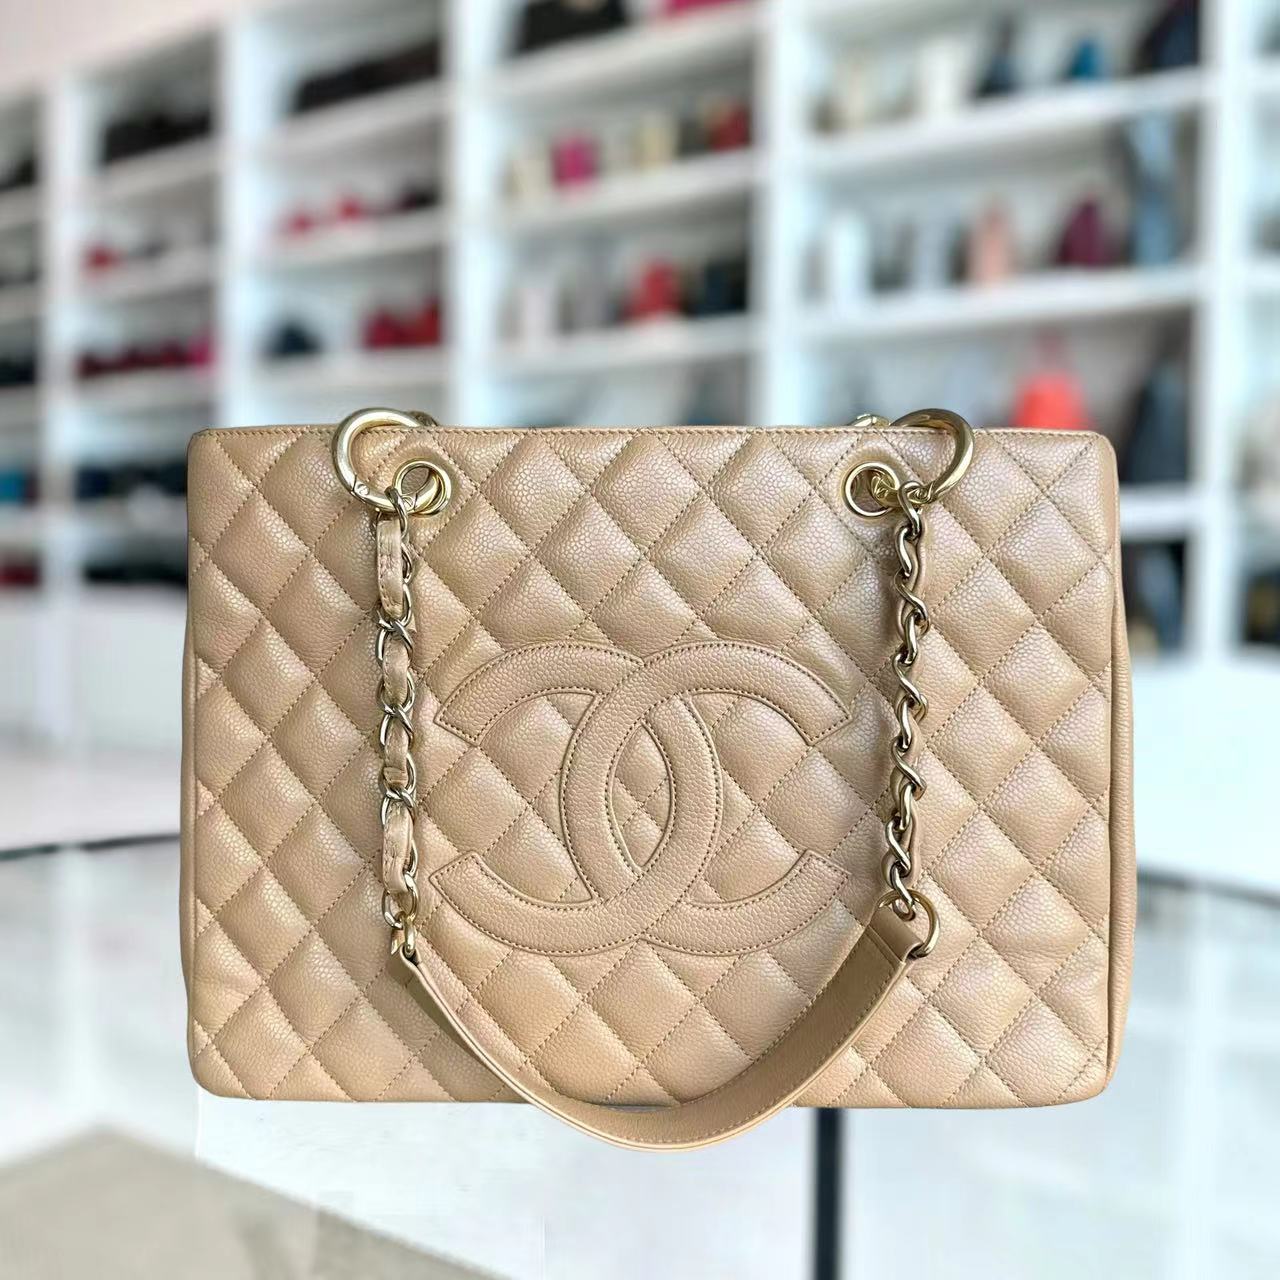 Chanel Caviar GST Grand Shopping Tote Quilted Calfskin Beige SHW No 12